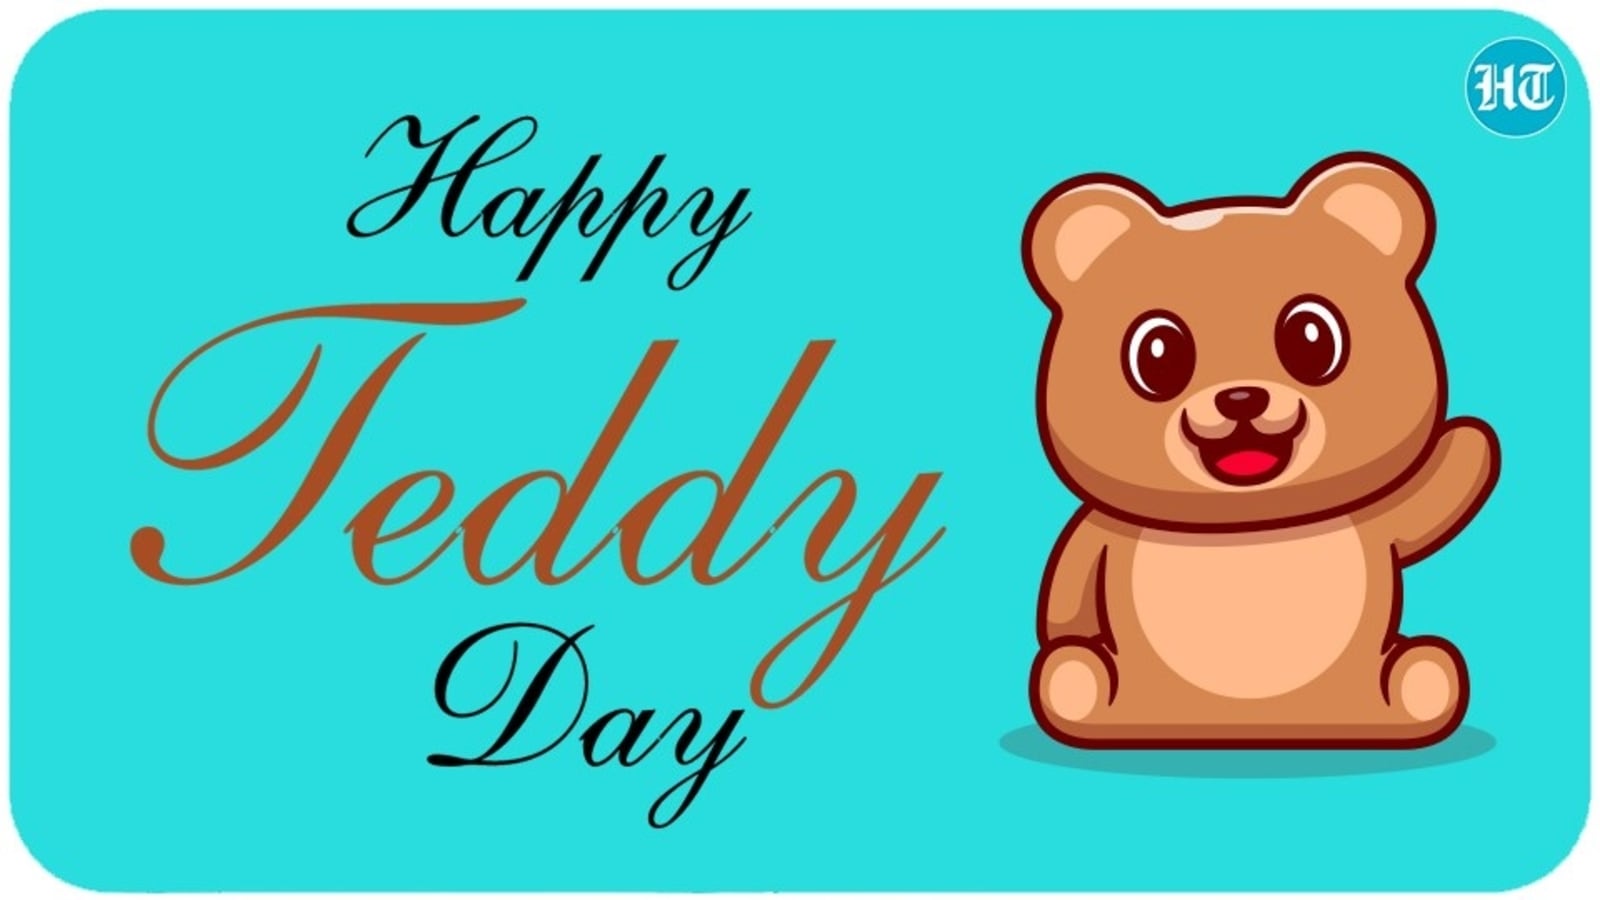 Happy Teddy Day 2022: Wishes, images, messages to share with your partner -  Hindustan Times